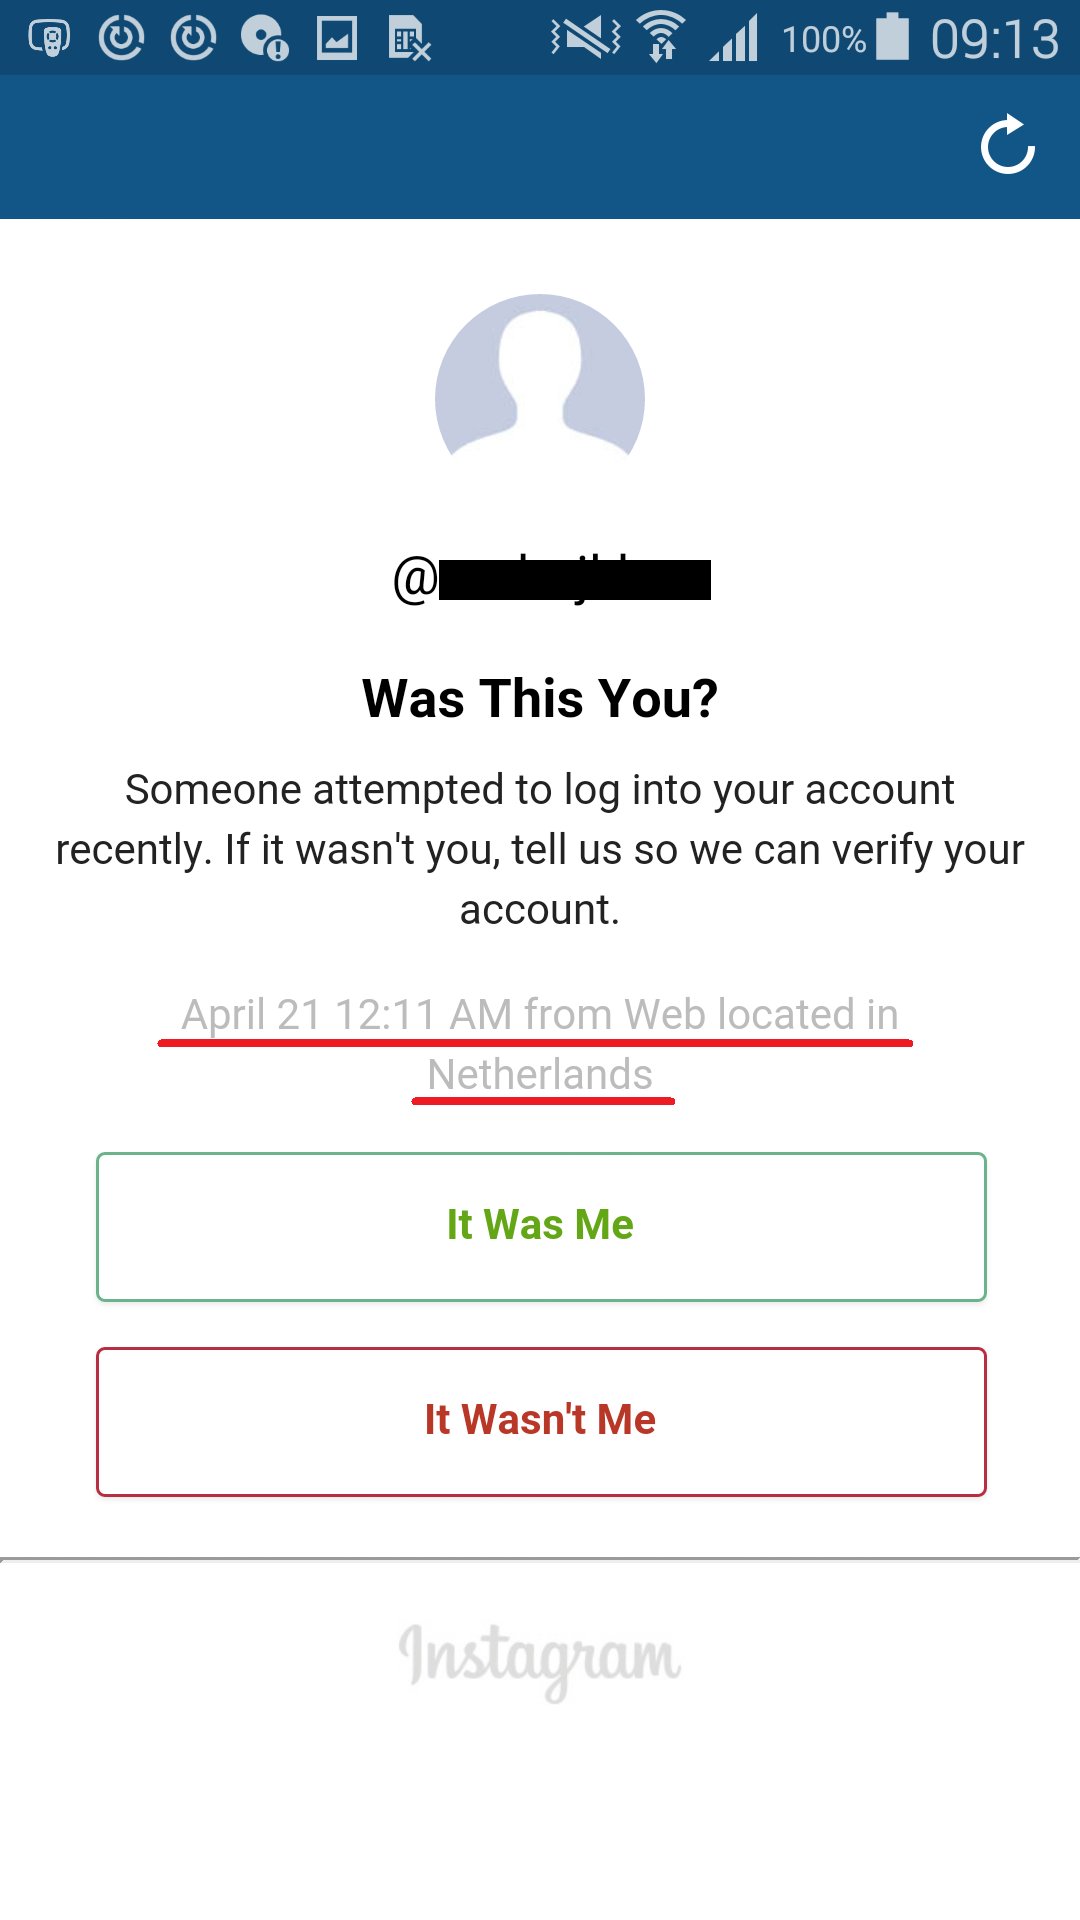 Please help! Someone is trying to log into my account even though